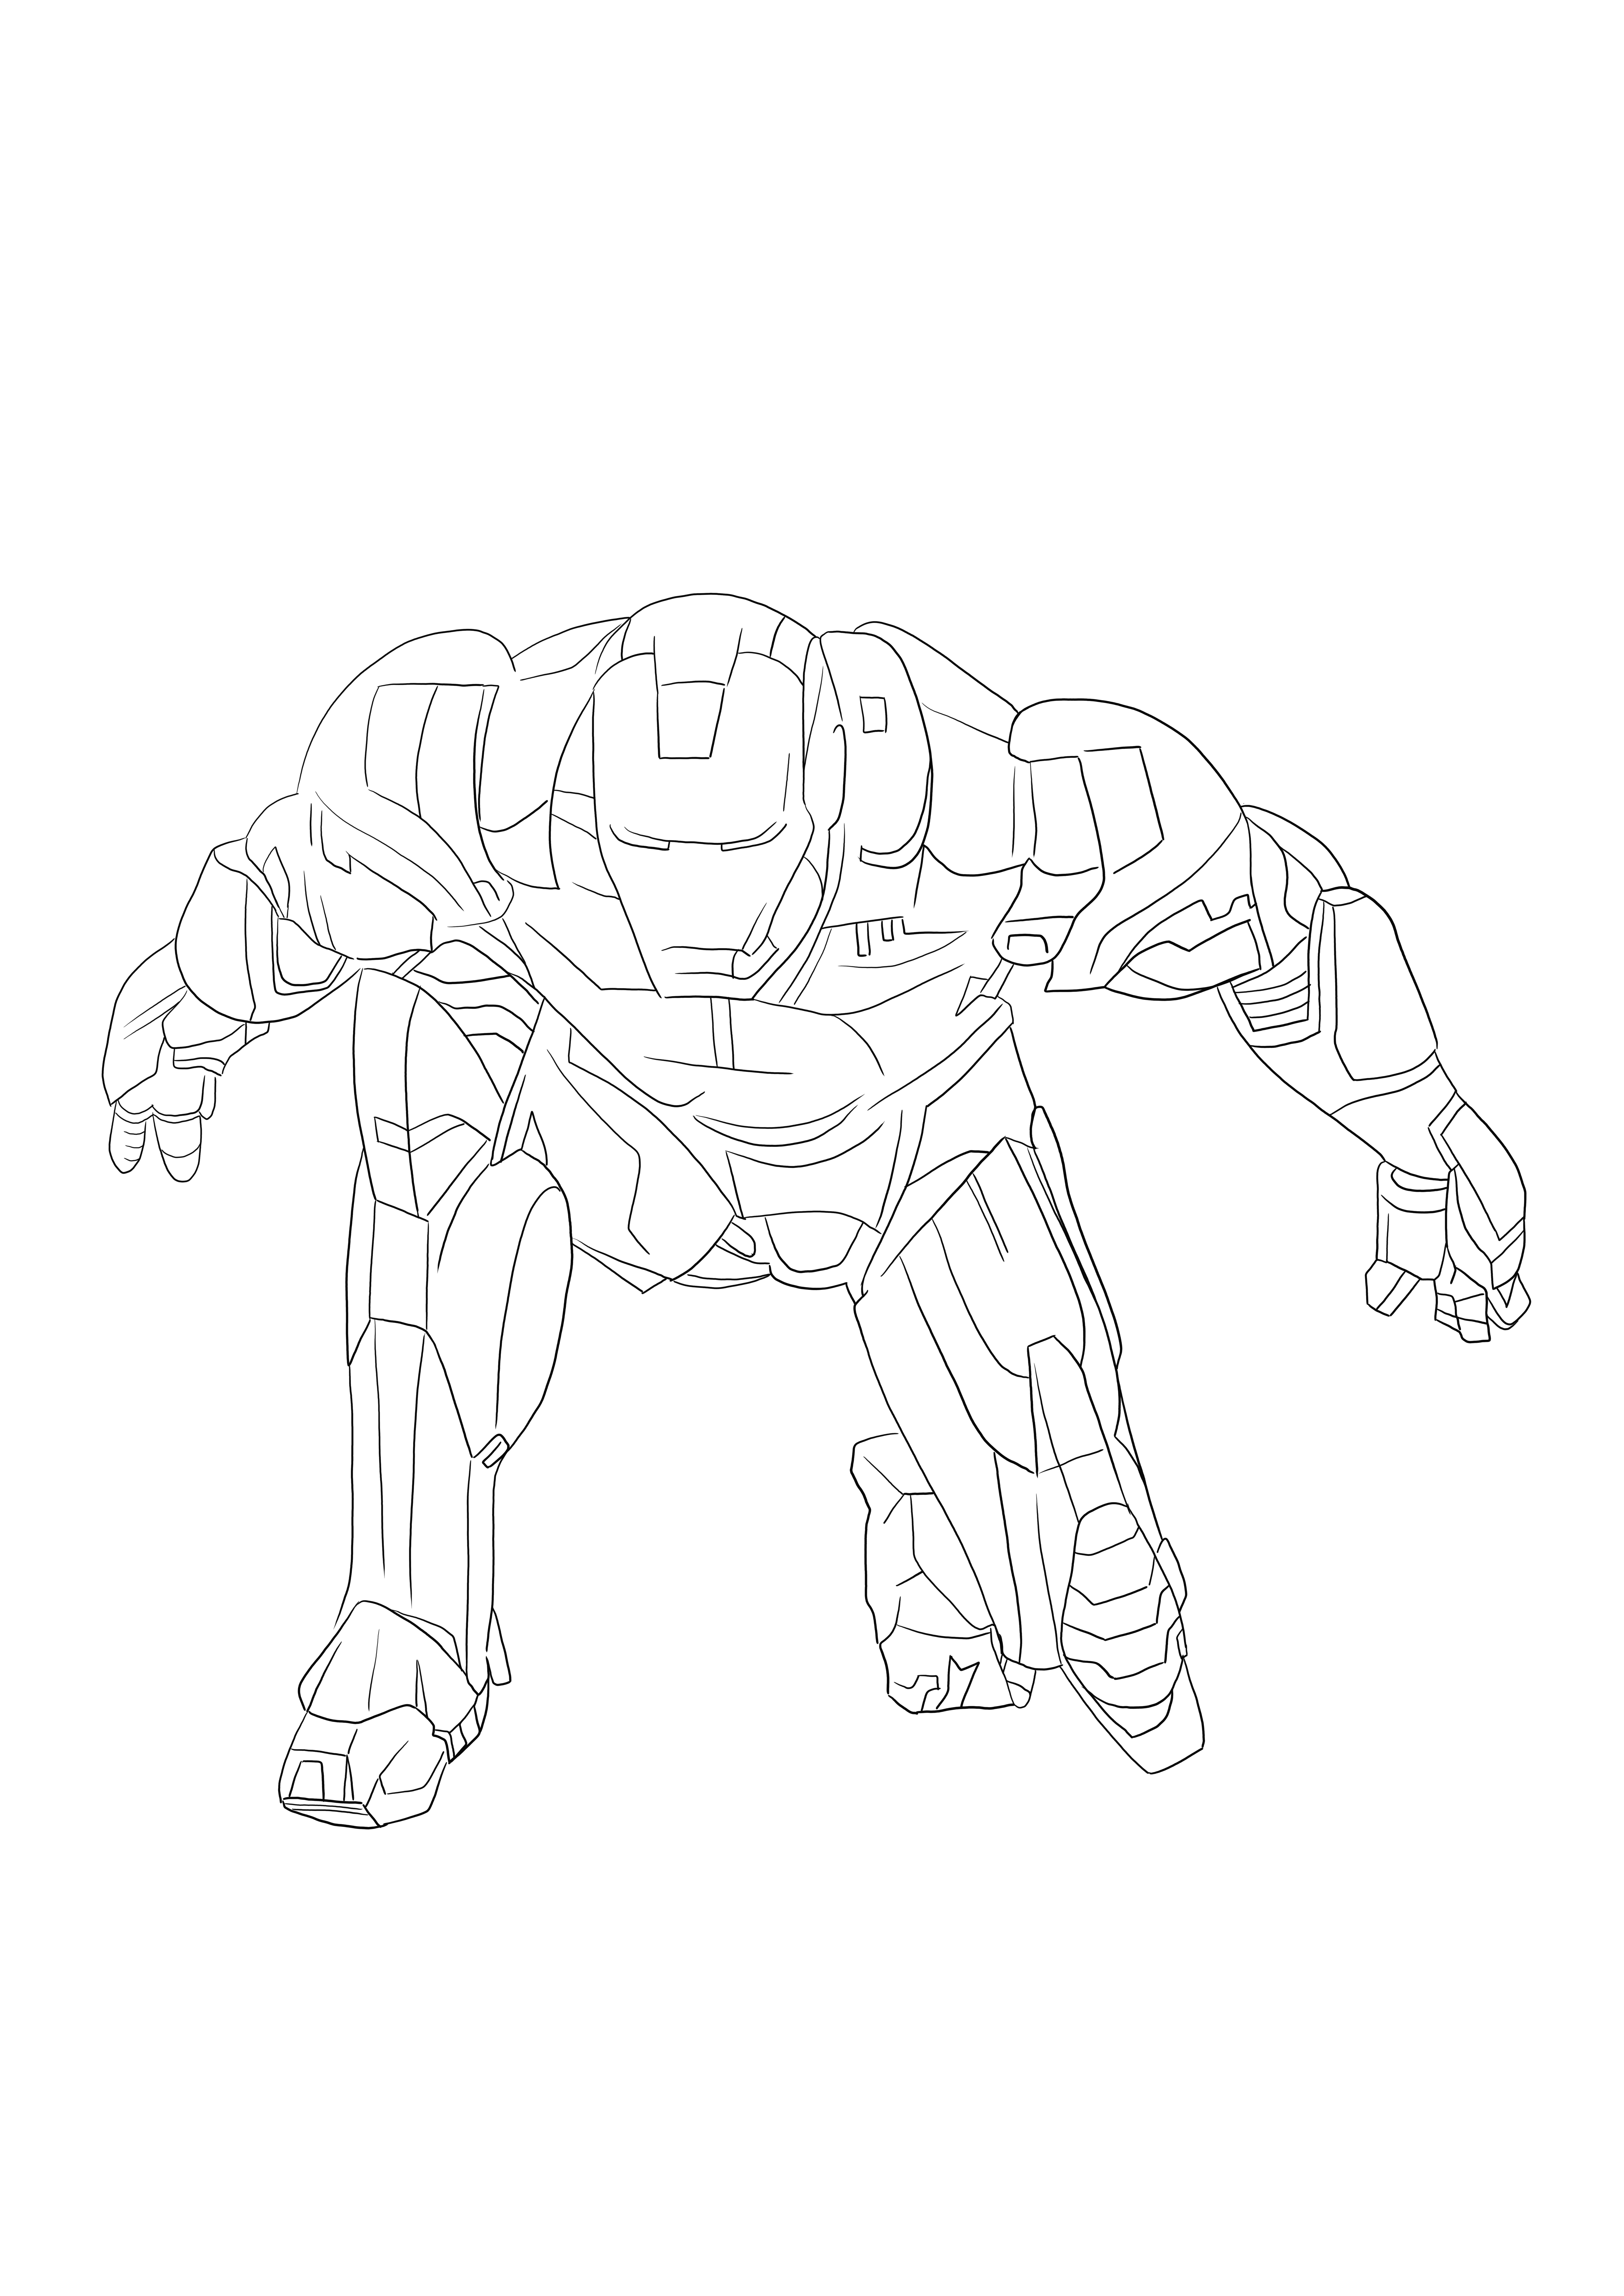 Iron Man is on the start and ready to be printed and colored for free